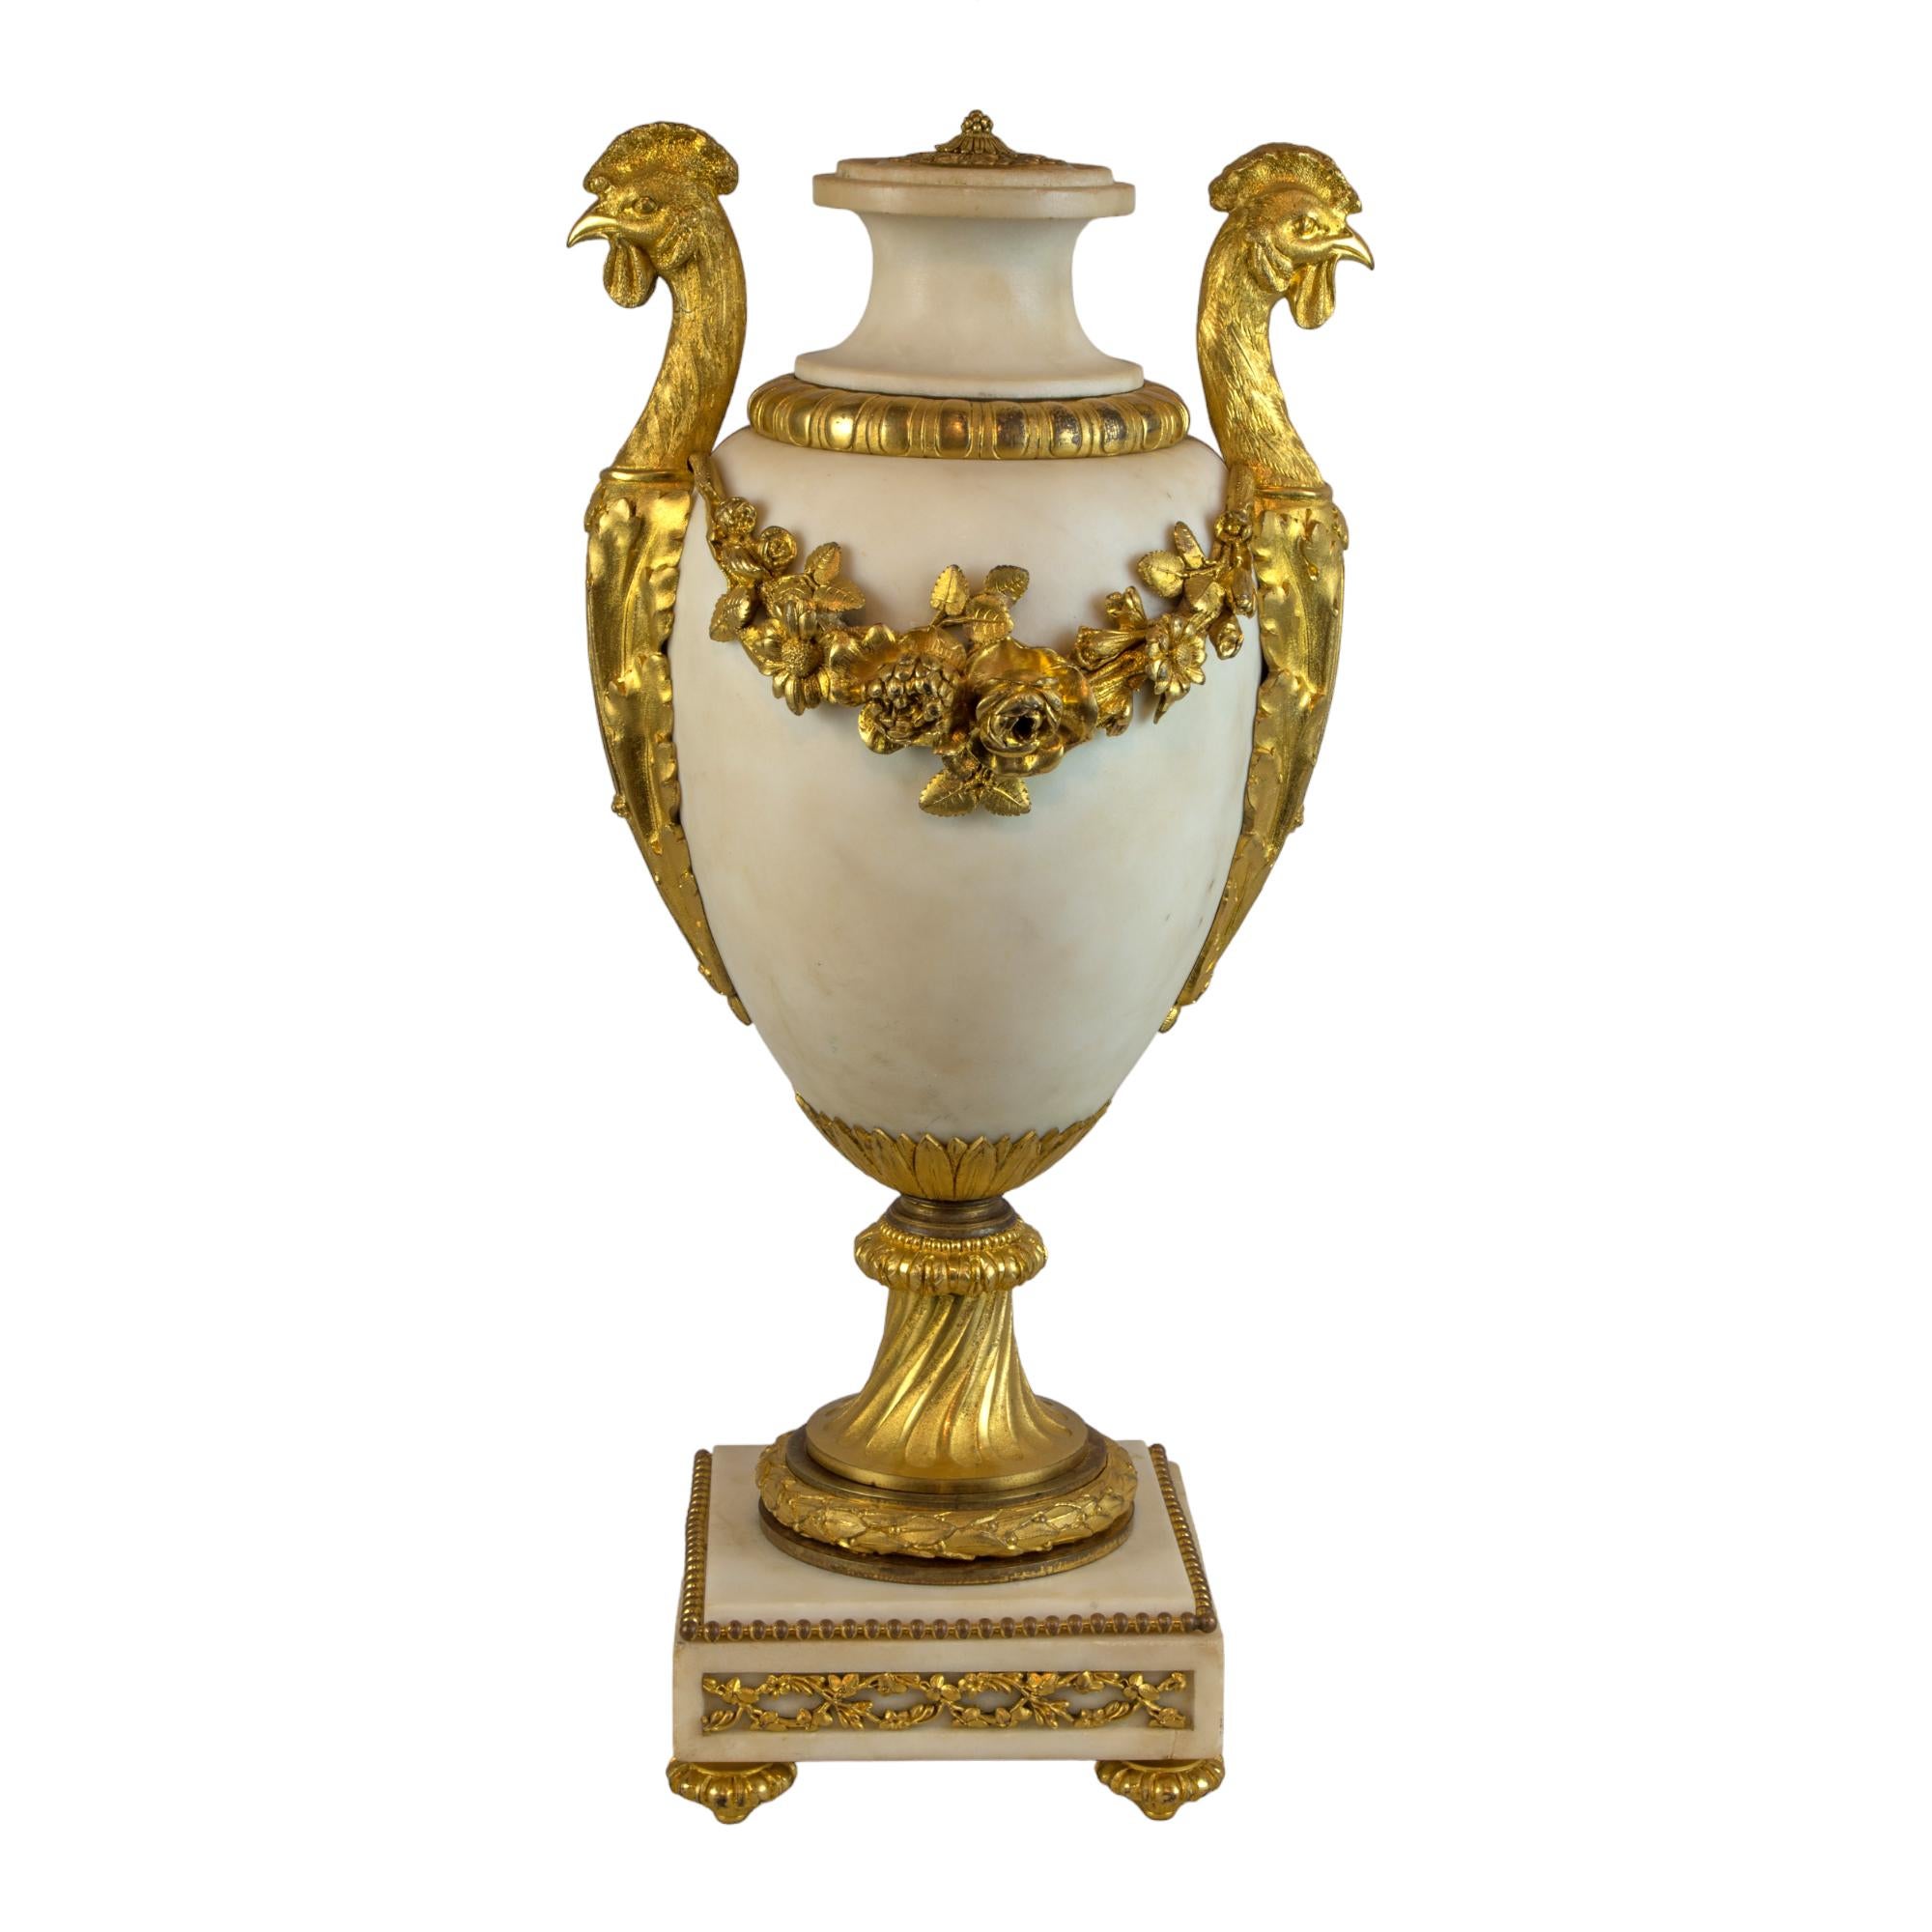 19th Century Magnificent Pair of Louis XVI Style Gilt-Bronze-Mounted White Marble Urns For Sale